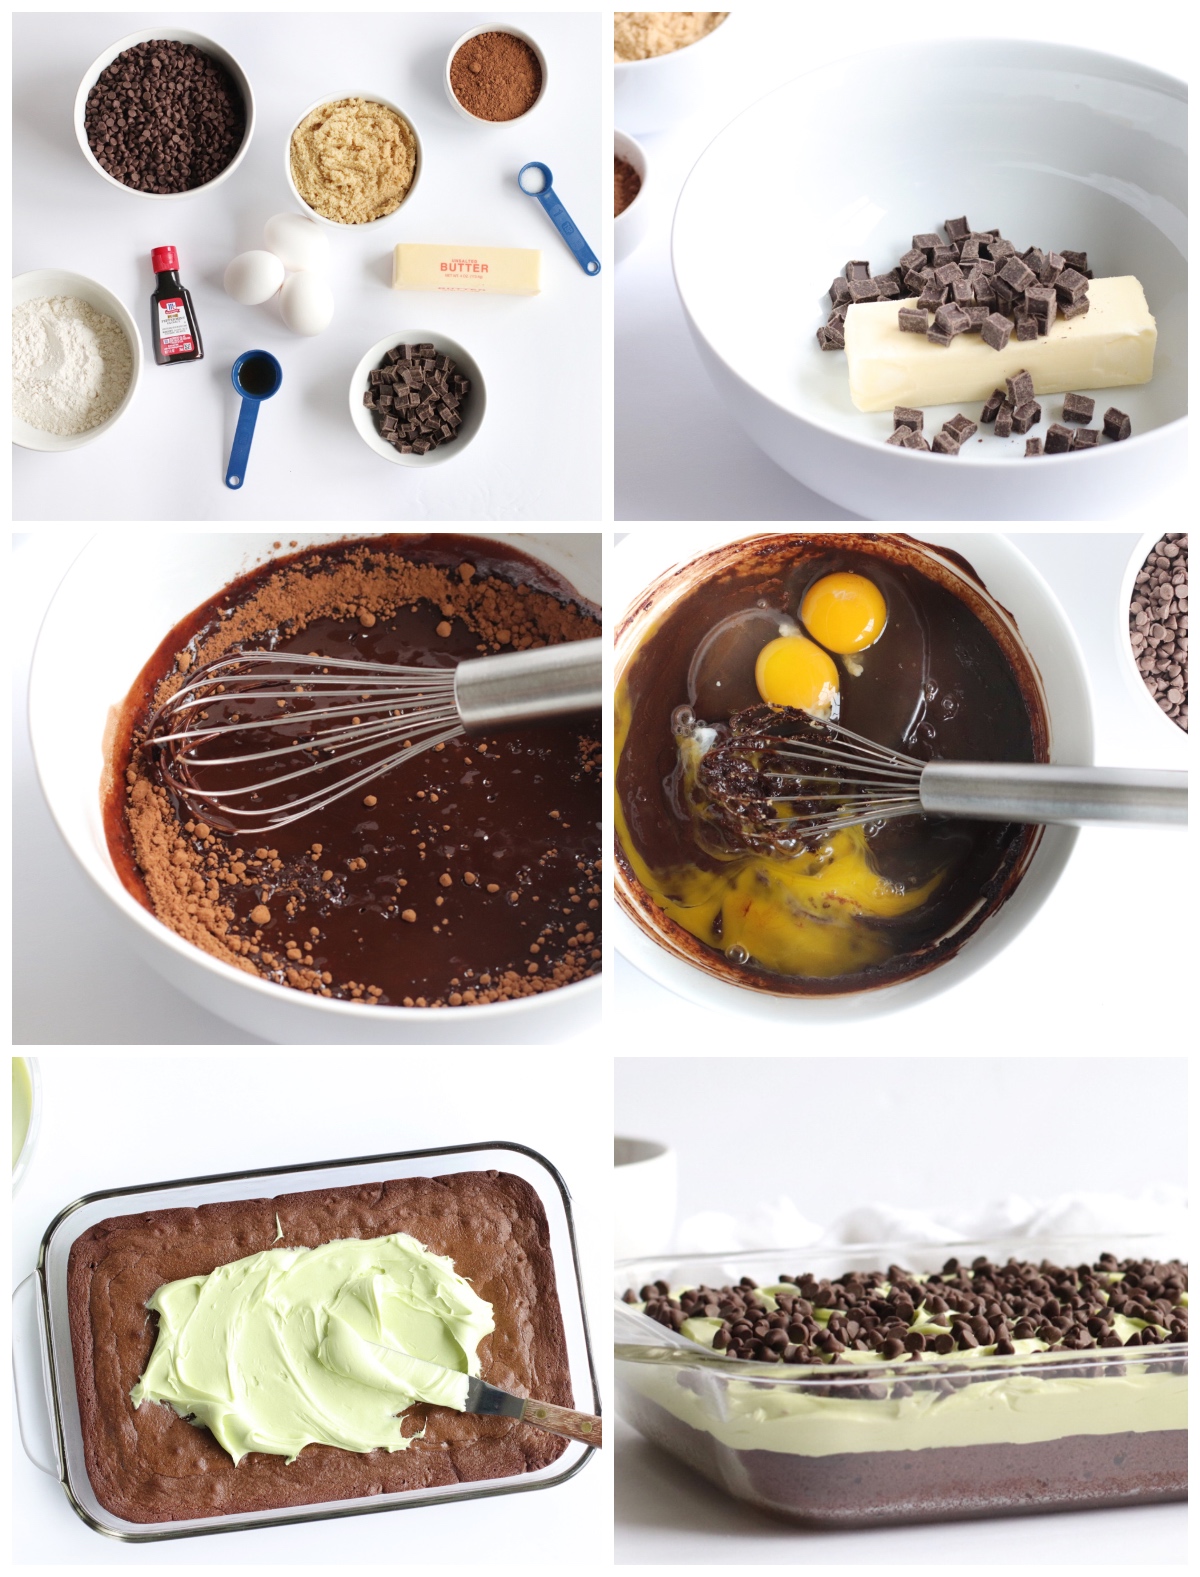 how to make mint chocolate chip brownies step by step photo instructions